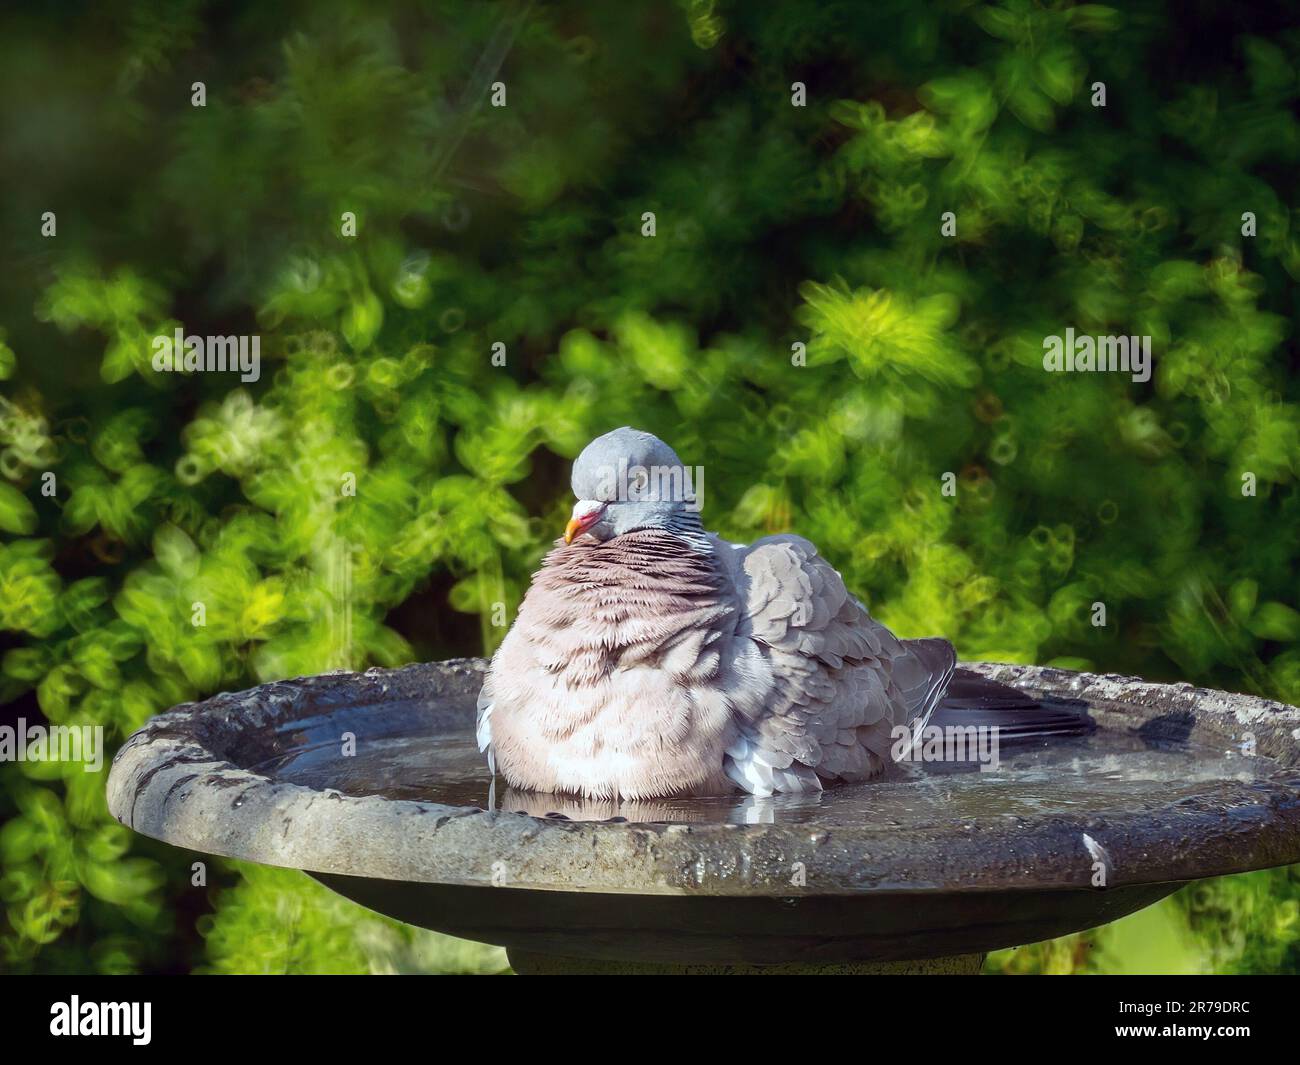 Large adult common wood pigeon (Columba palumbus) with ruffled feathers sitting in water in a garden bird bath, Leicestershire, England, UK Stock Photo